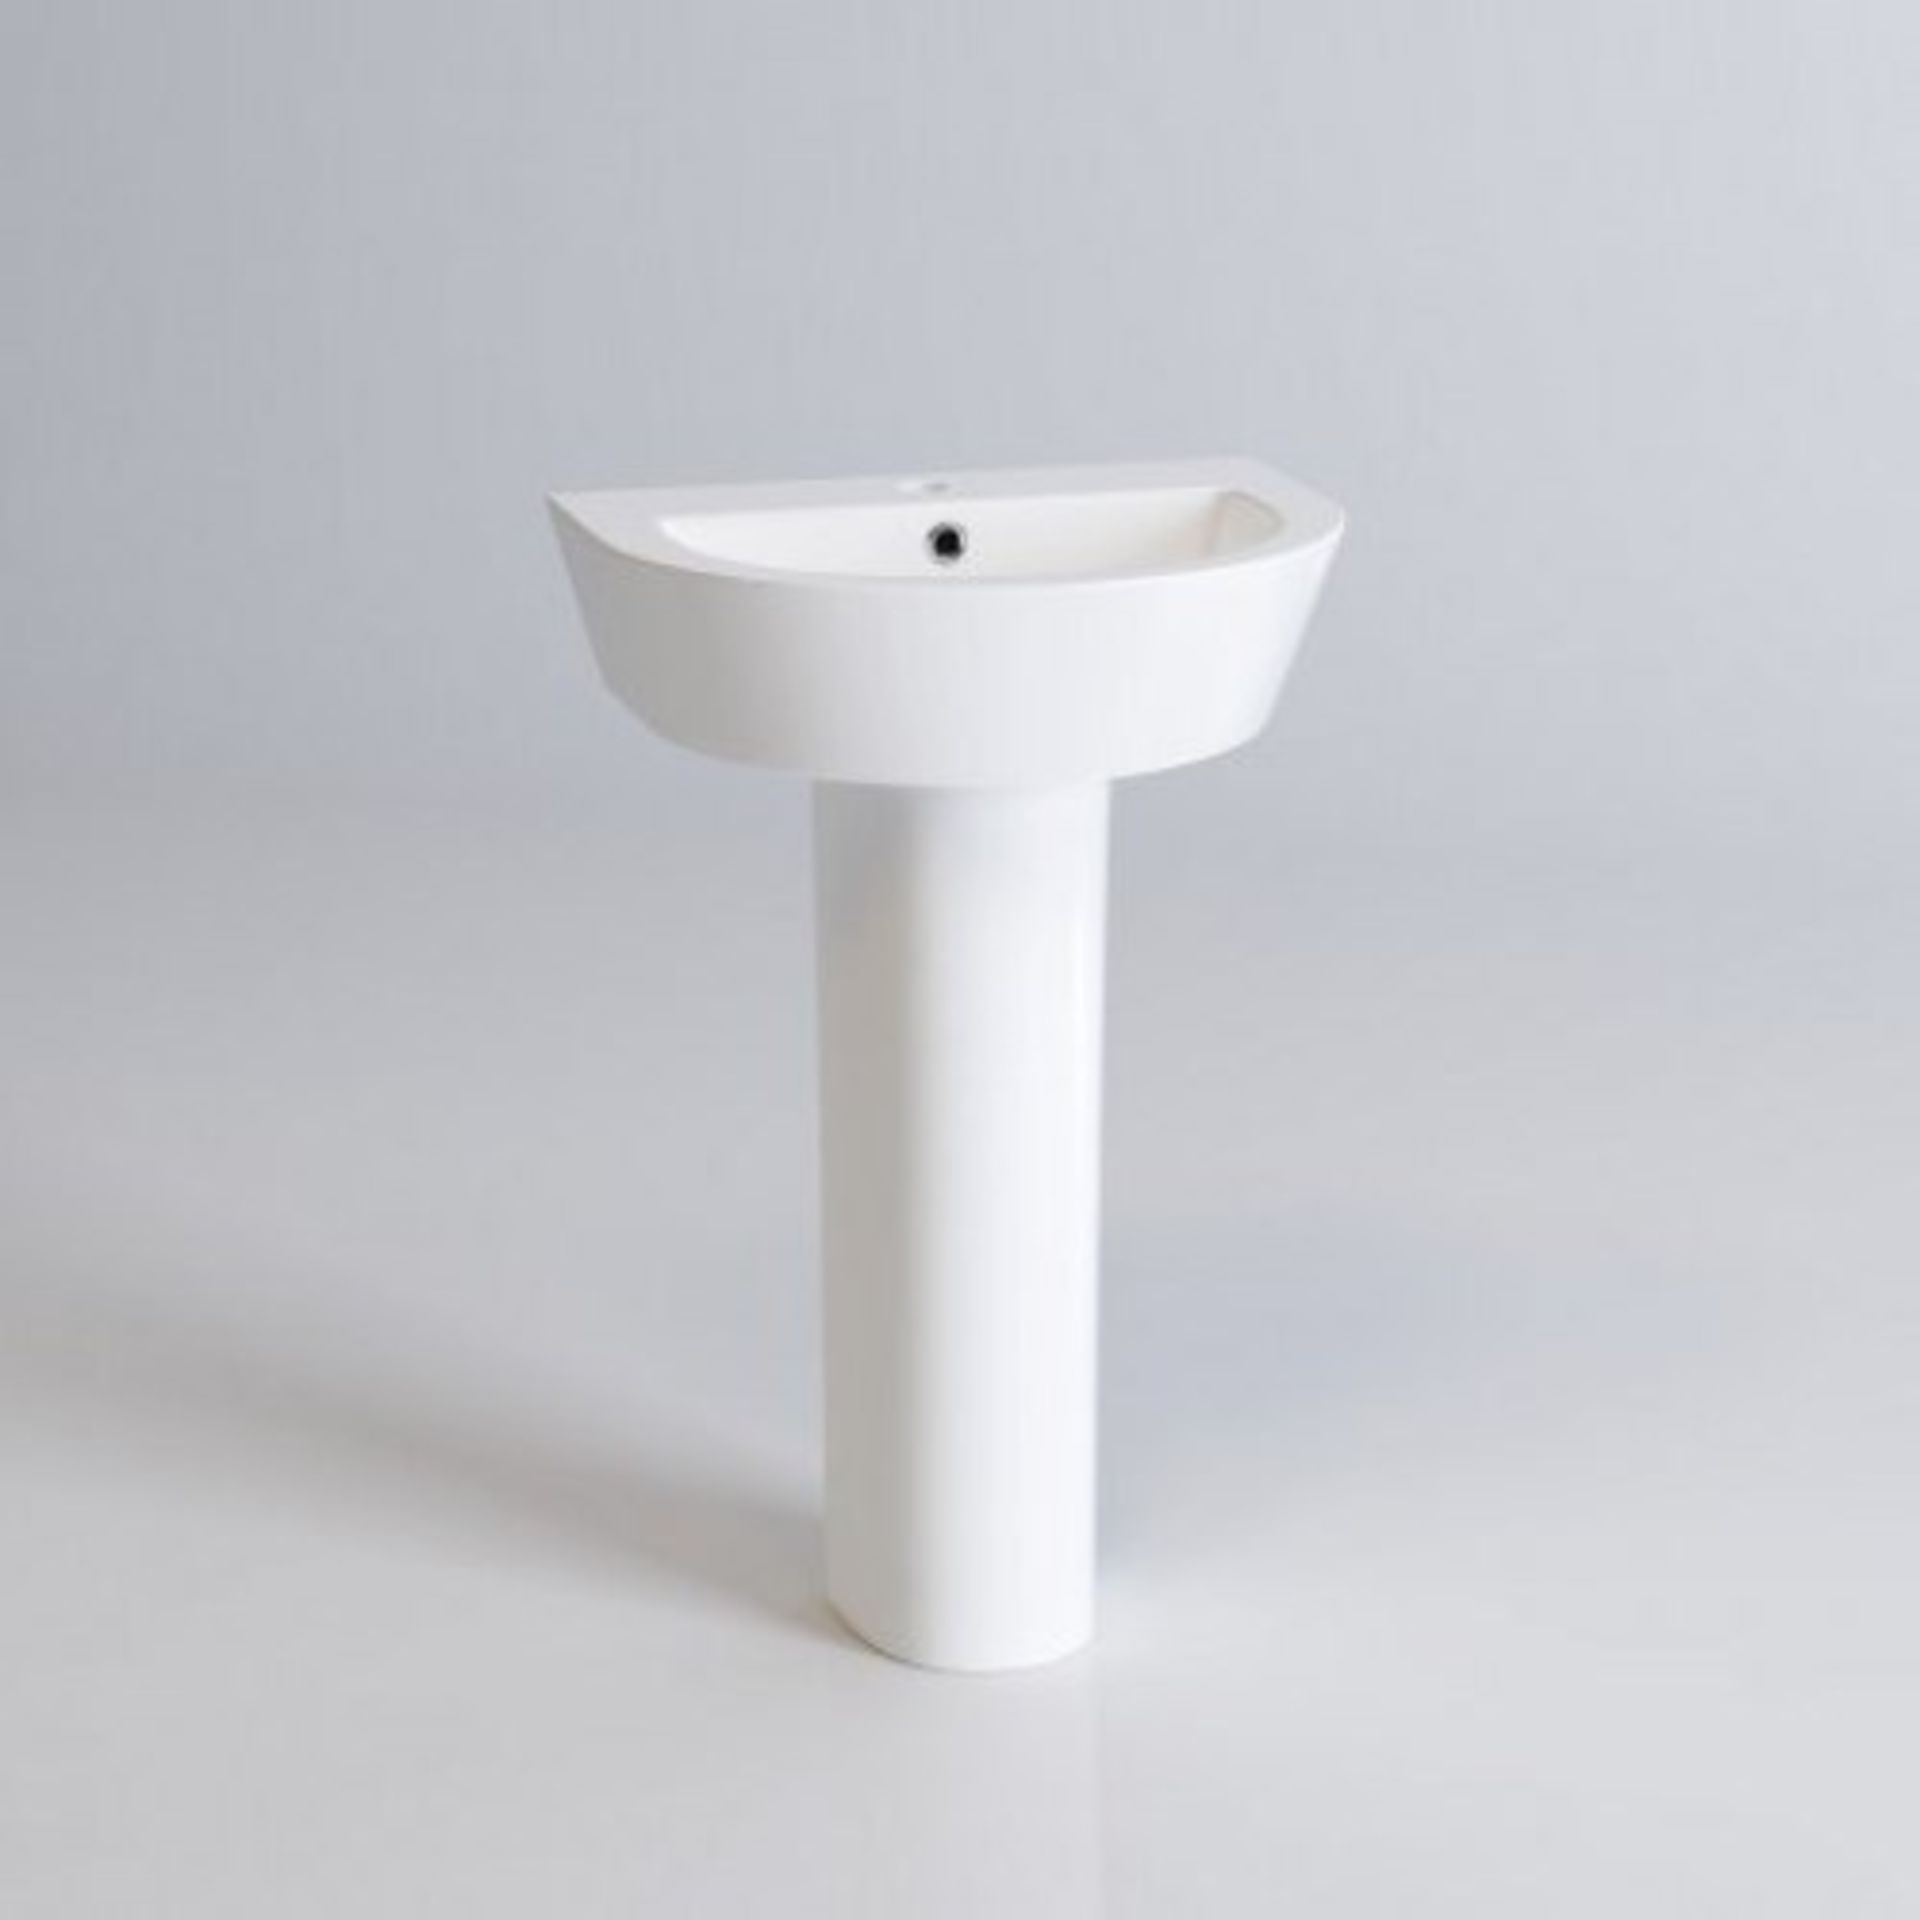 PALLET TO CONTAIN 10 x BRAND NEW BOXED LYON II BASIN & PEDESTAL - SINGLE TAP HOLE. RRP £229.9... - Image 2 of 2